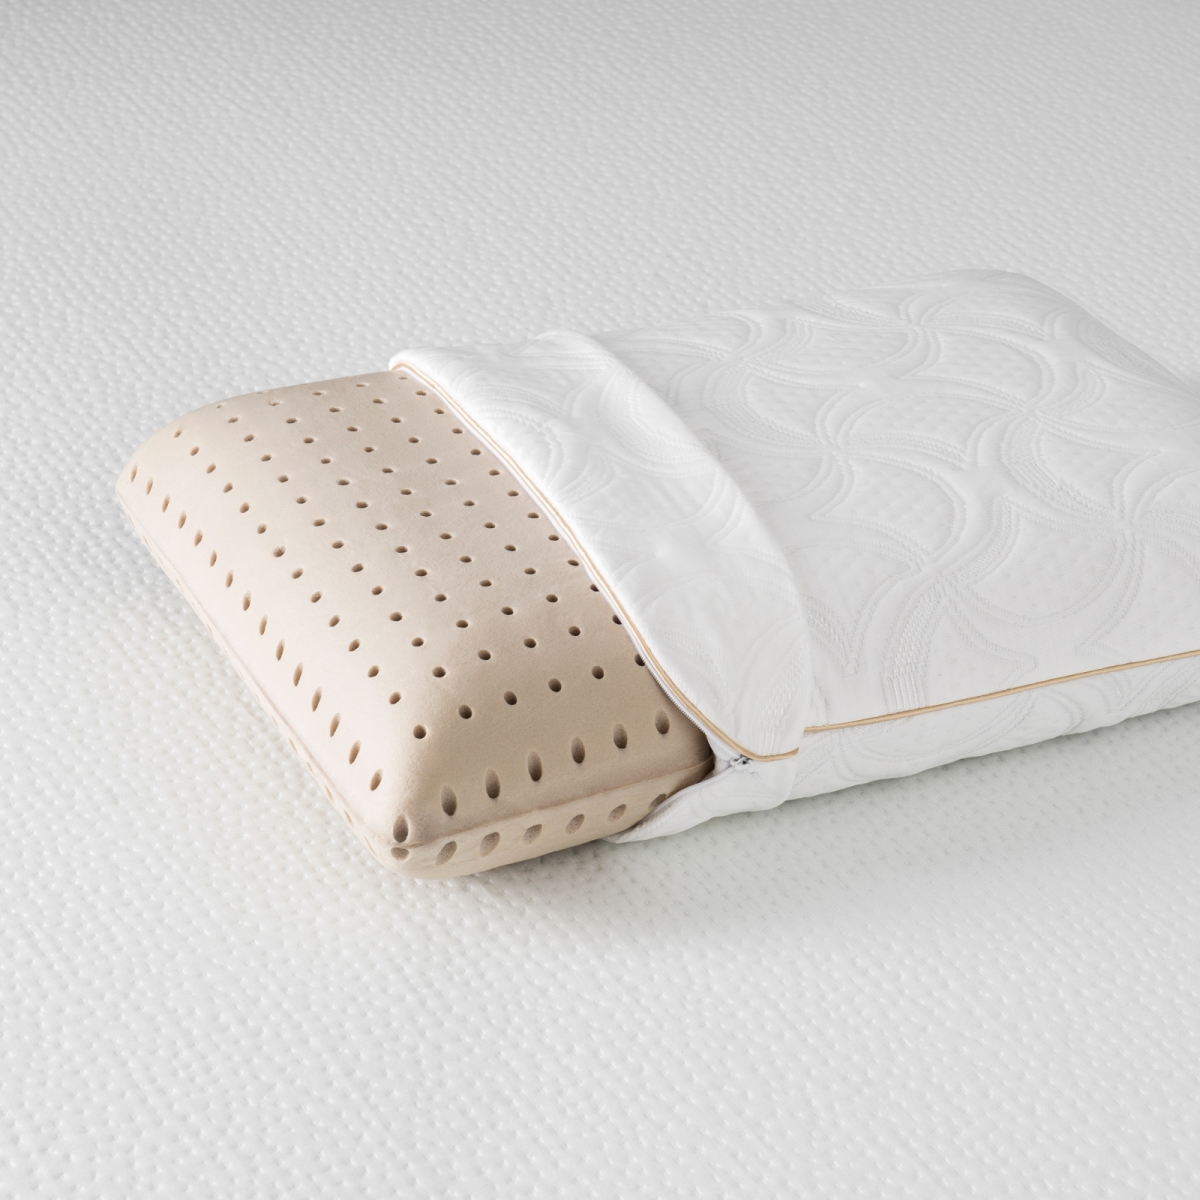 P0010 Copper Infused Ventilated Molded Memory Foam Pillow With 400 Gsm Cooling Ice Fabric Cover